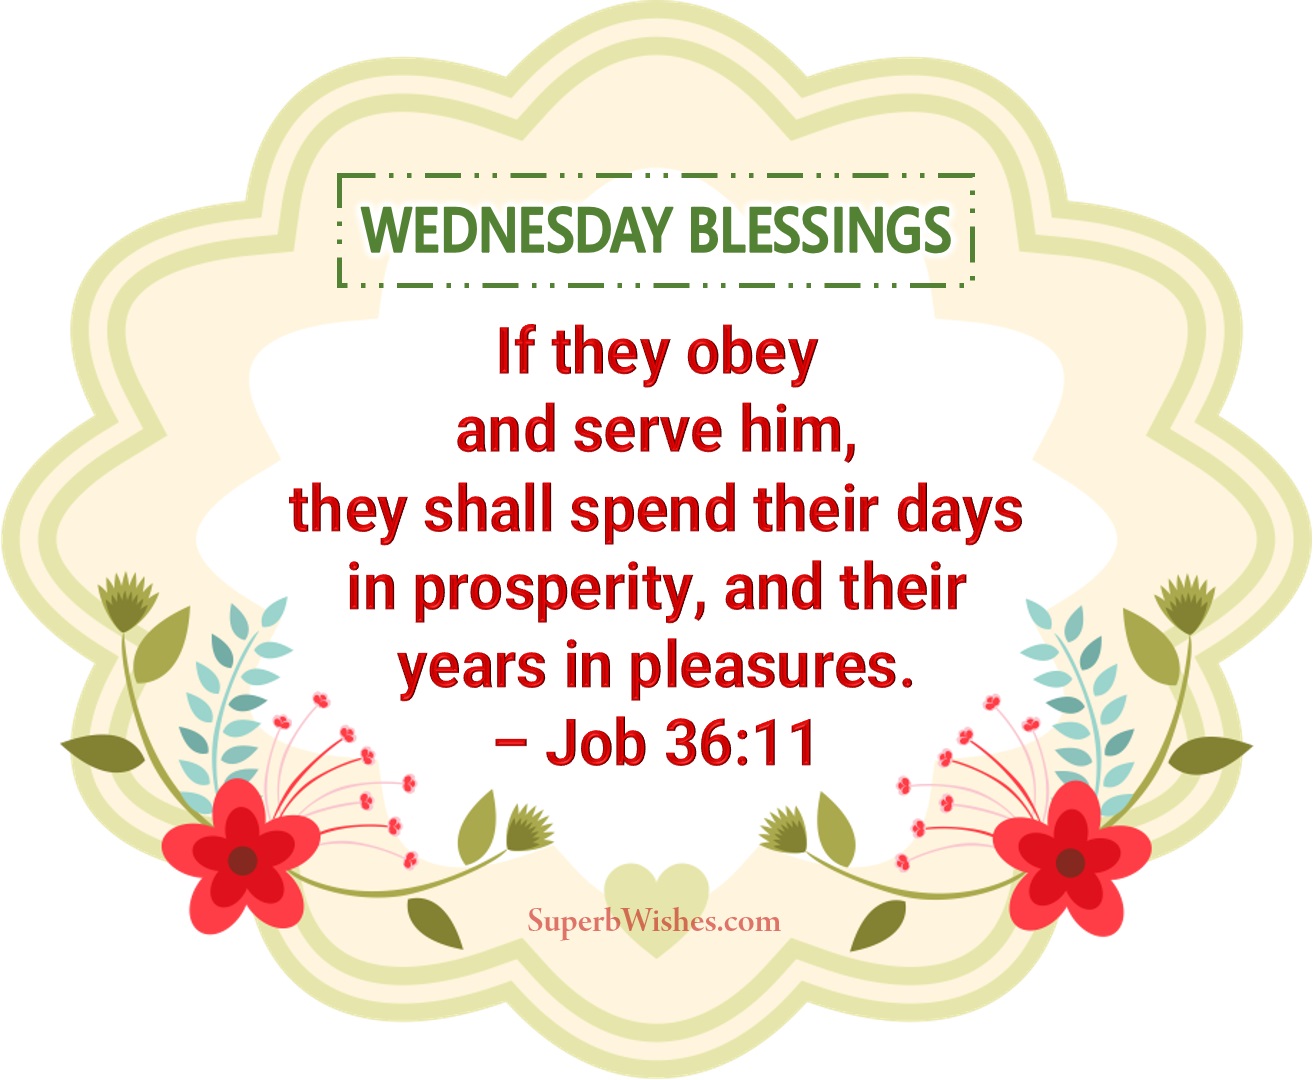 Wednesday blessings images Bible verse. Superbwishes.com